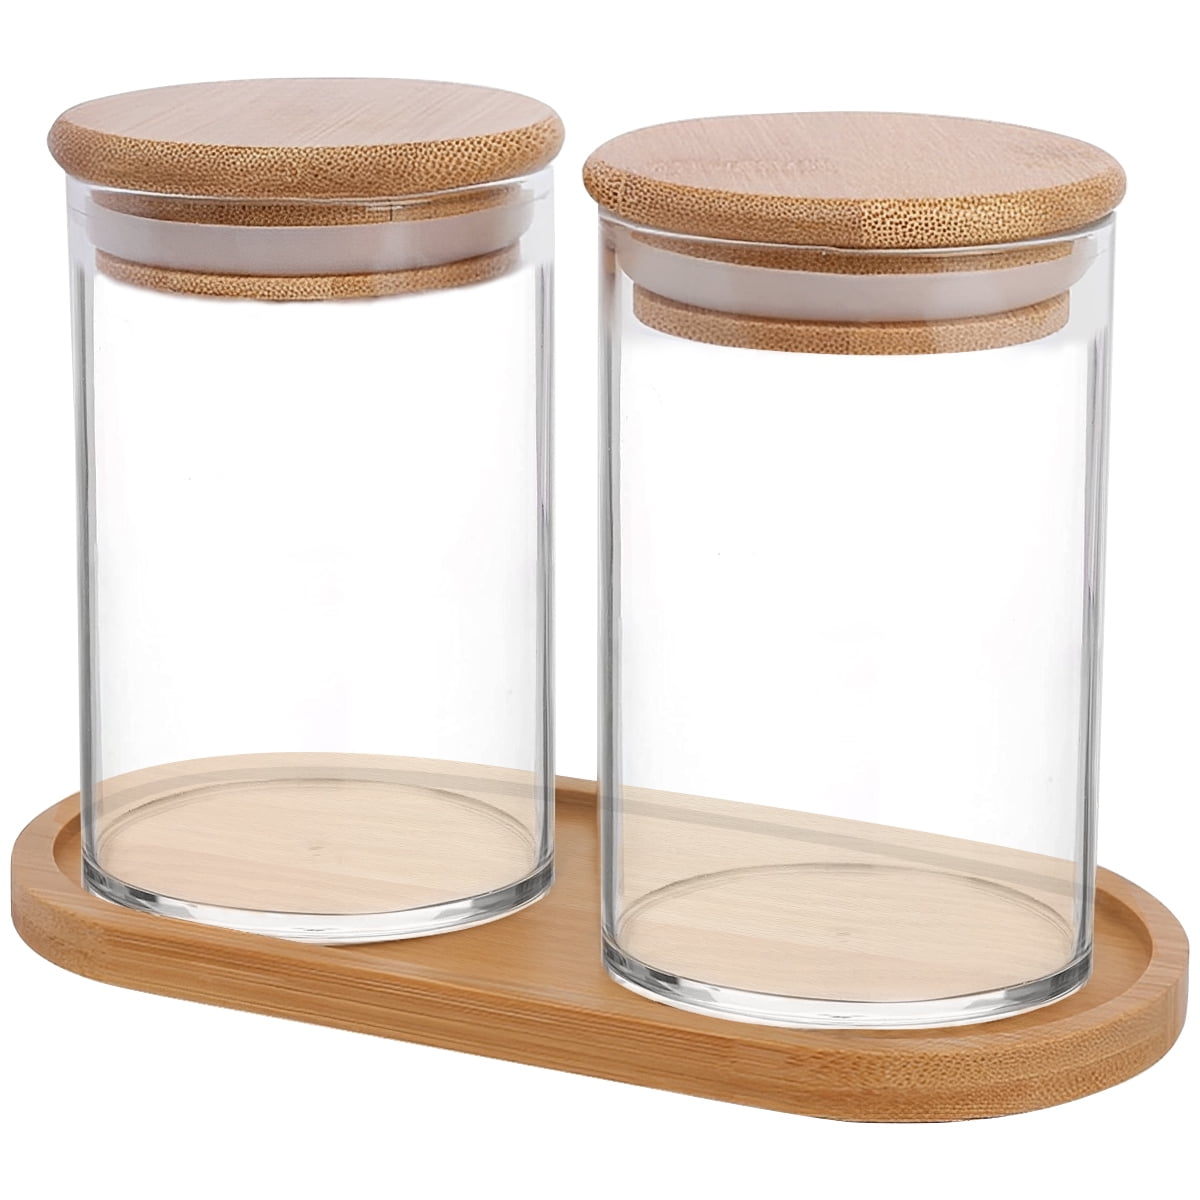 16 oz Premium Glass Jars with Handcrafted Bamboo Lids for Nursing Moms –  Lacsnac